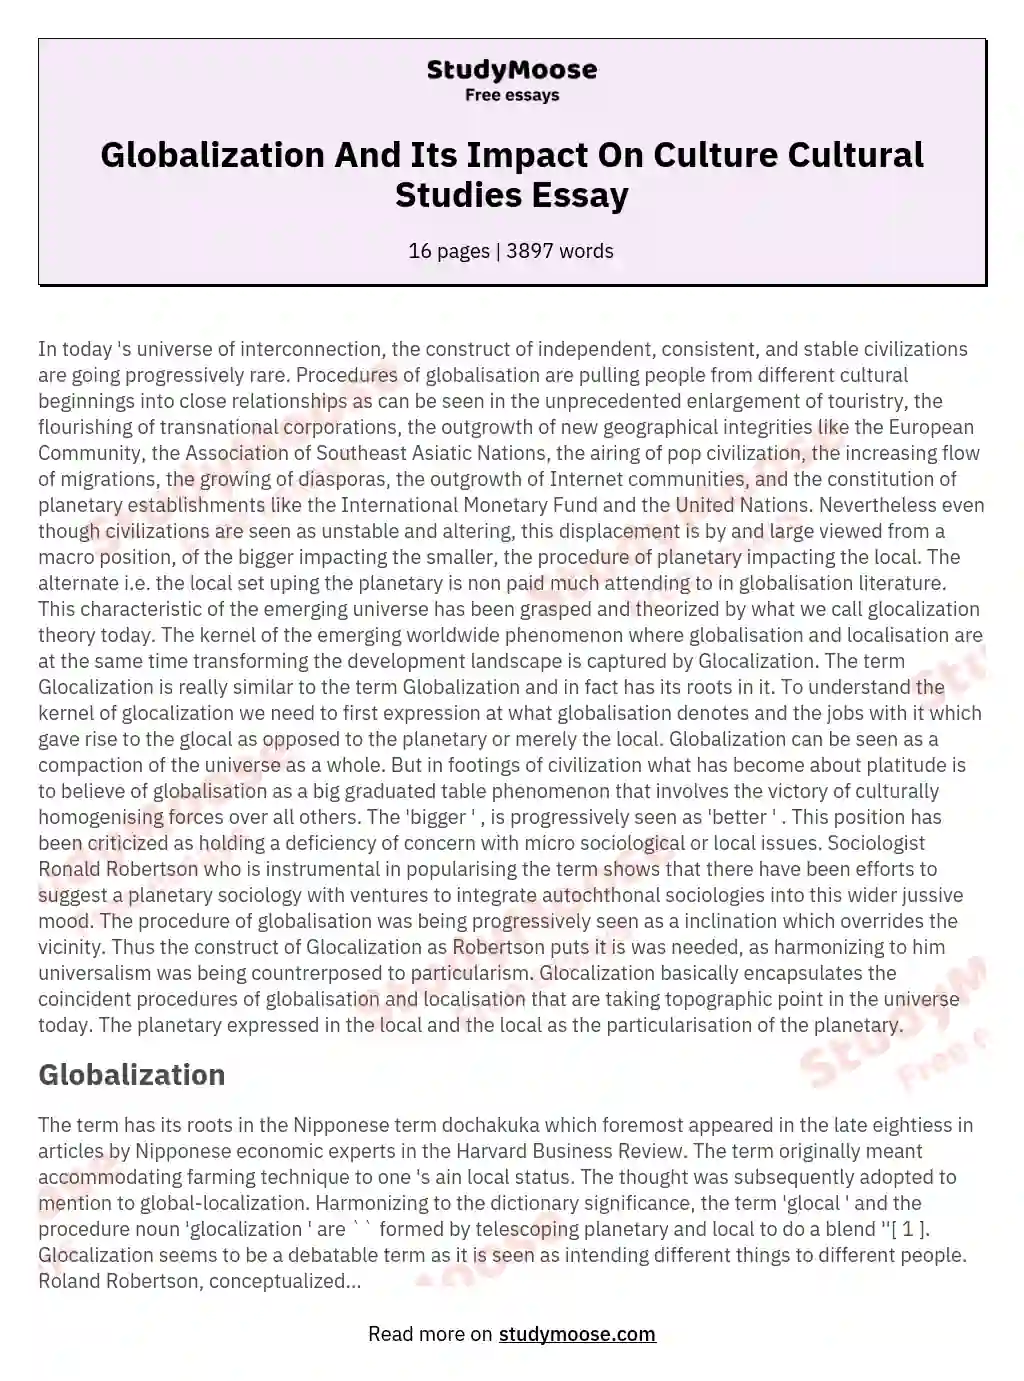 Globalization And Its Impact On Culture Cultural Studies Essay essay